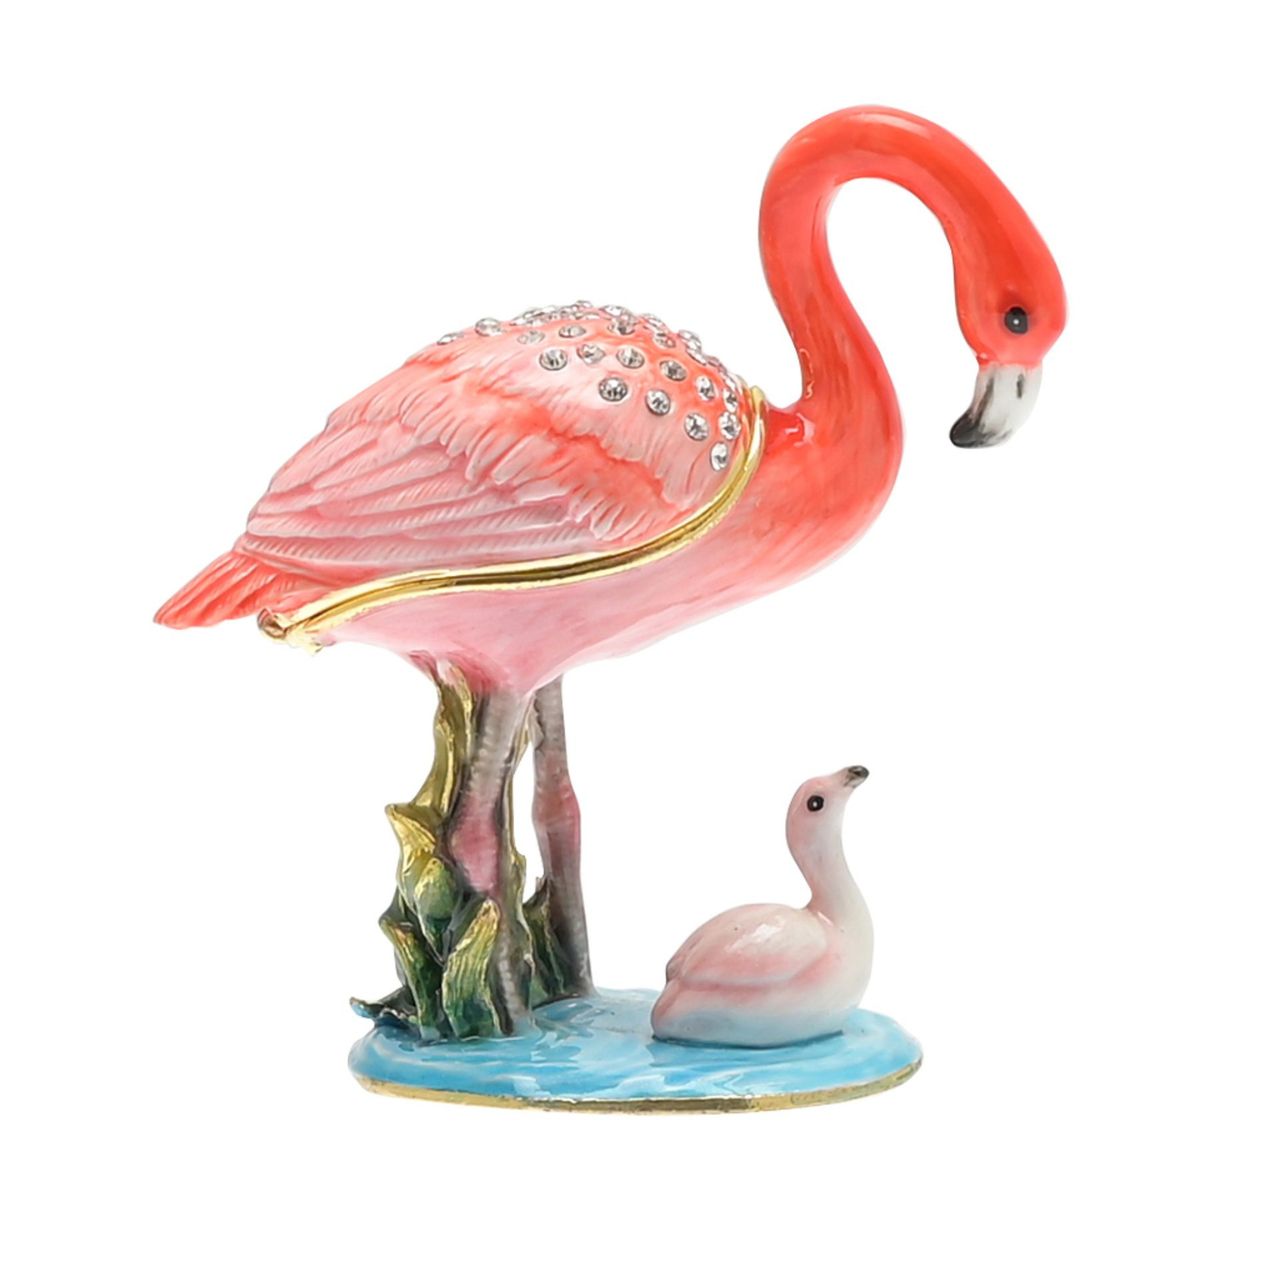 Treasured Trinkets - Mother & Baby Flamingo  A mother & baby flamingo trinket box from Treasured Trinkets by STRATTON®.  This eye-catching trinket box makes a true statement piece for any bedroom.